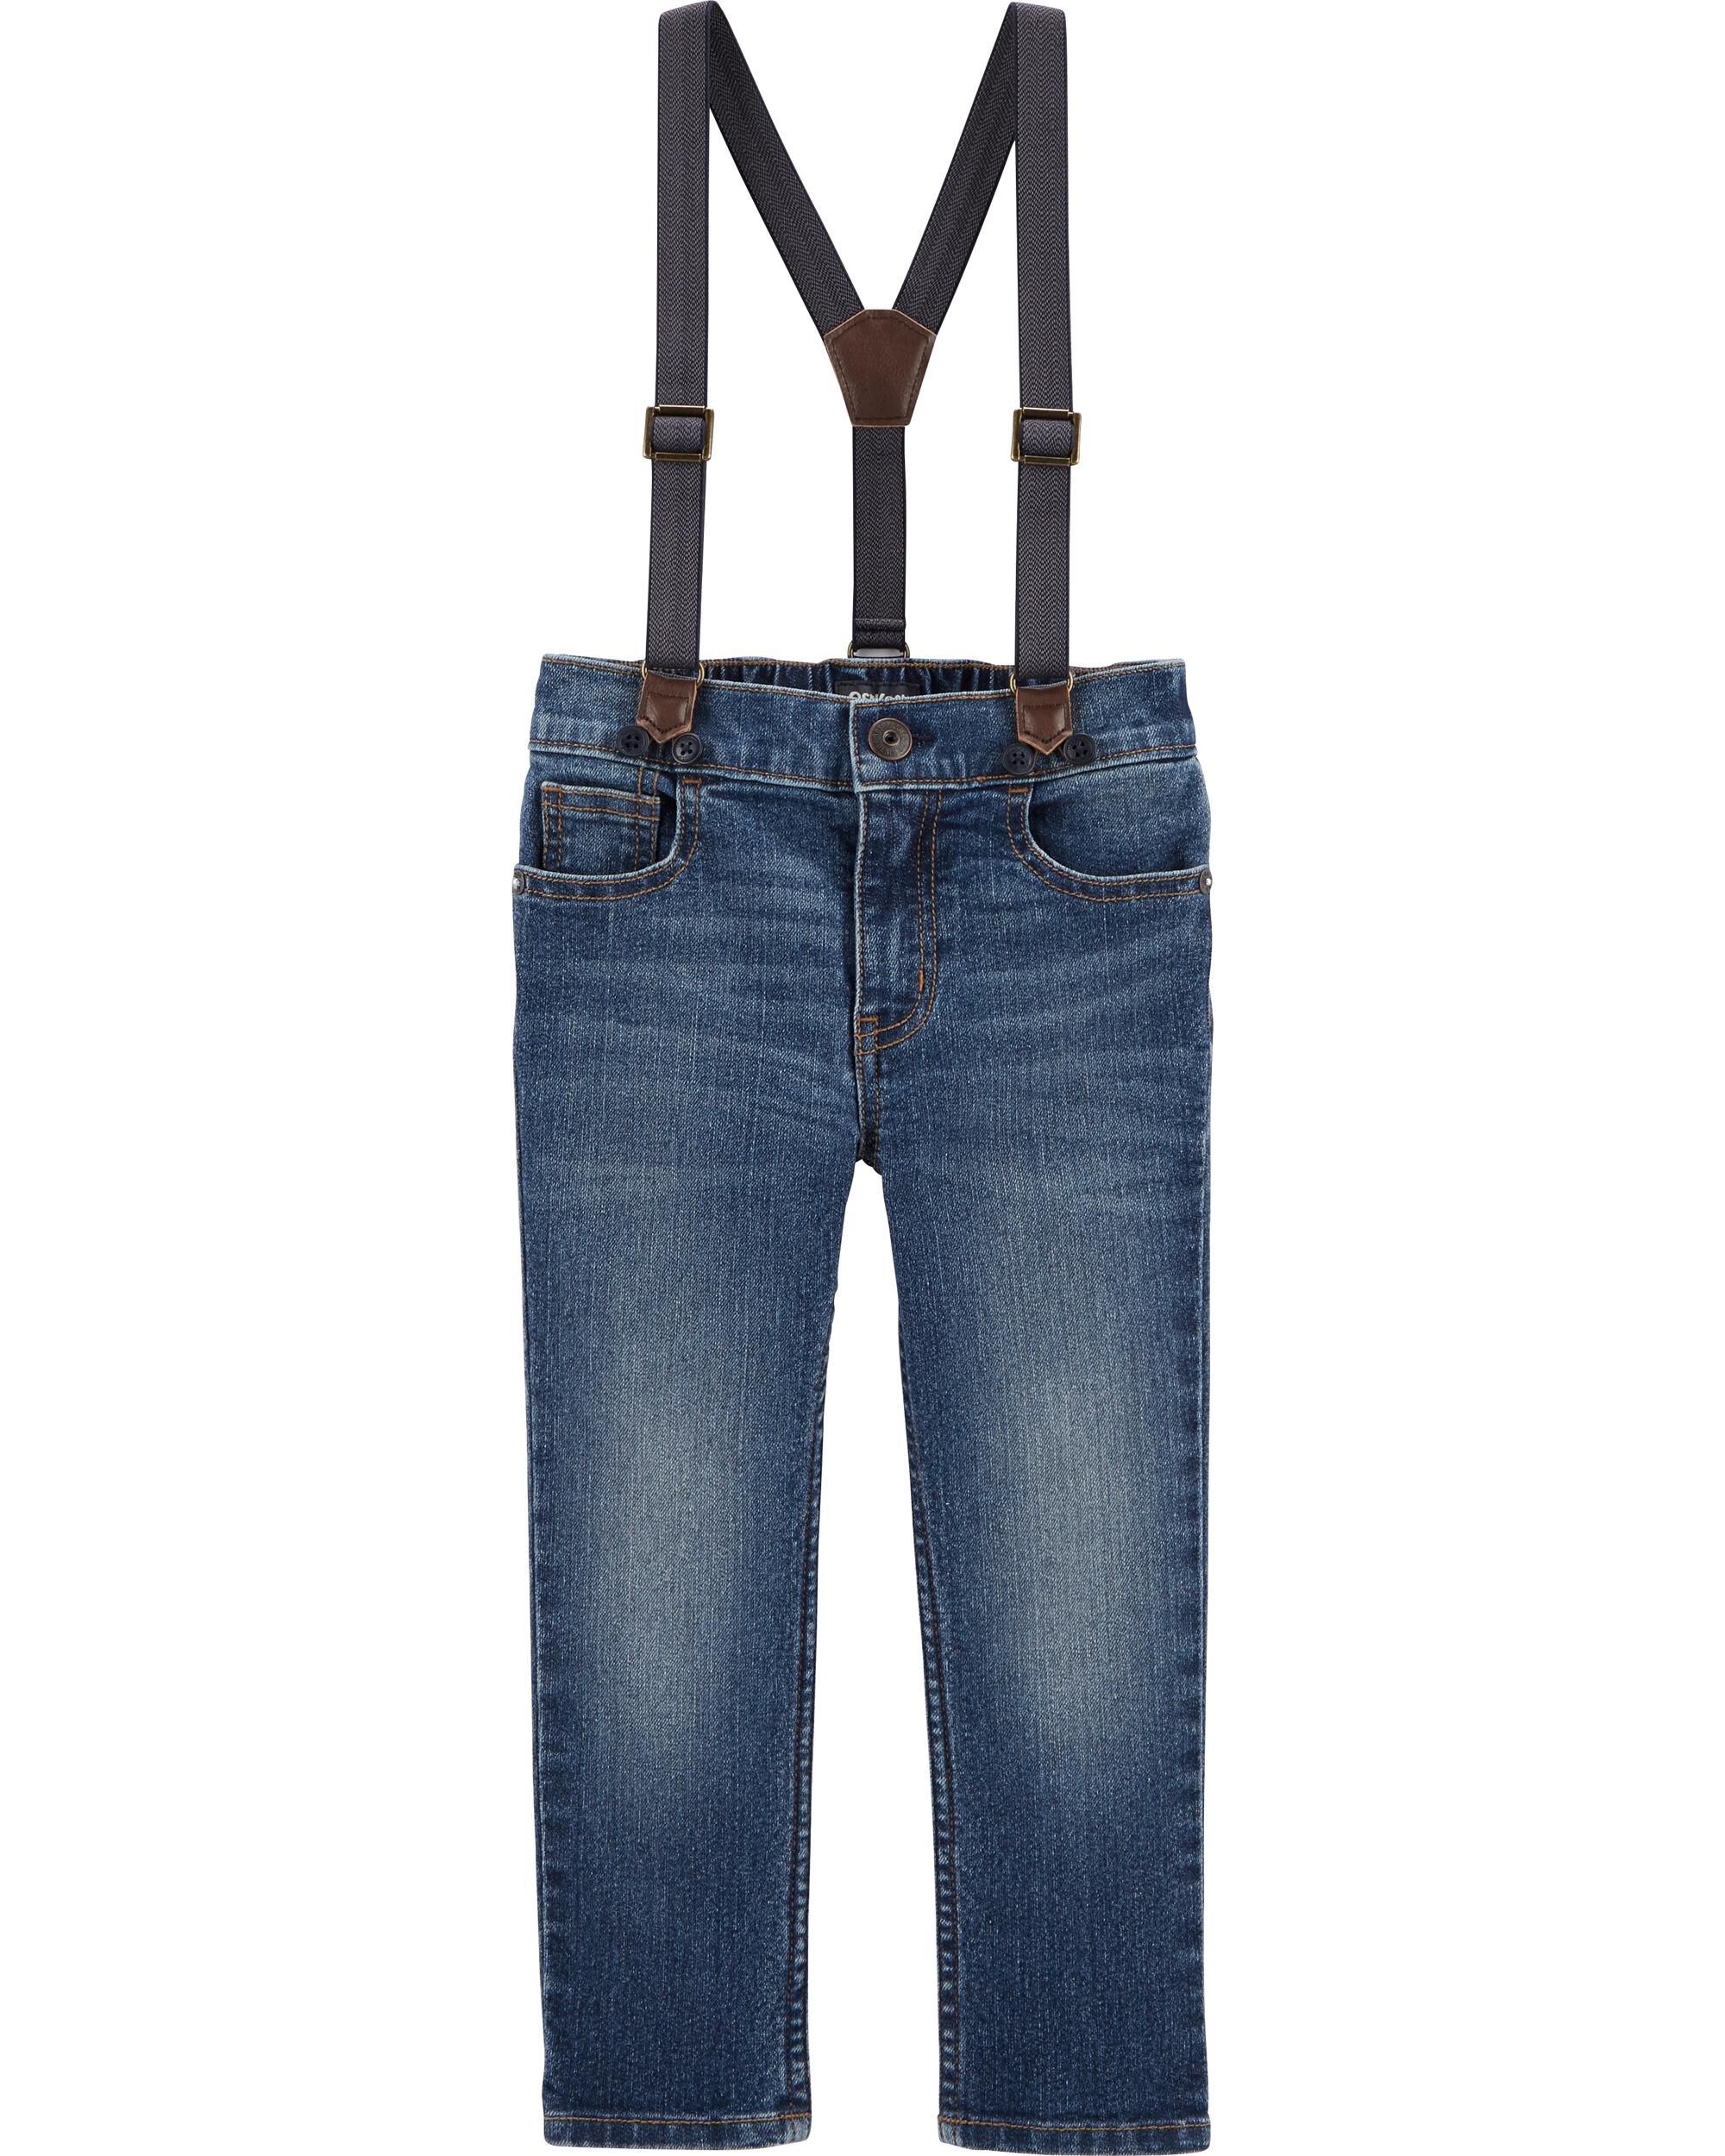 boys jeans with suspenders